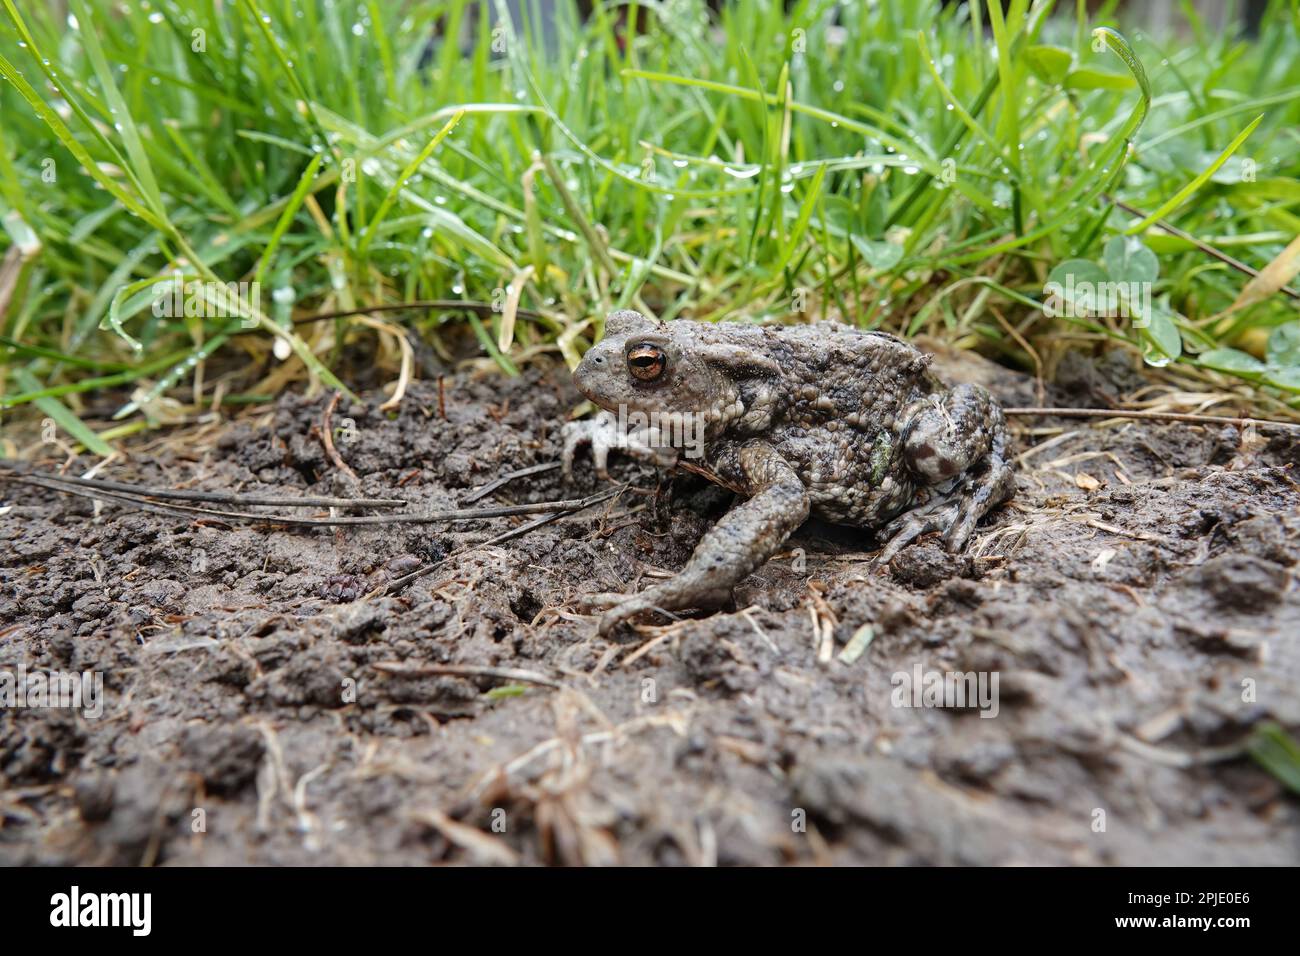 Closeup on a female European common toad, Bufo bufo sitting on the ground and grass in the garden in rainy weather Stock Photo